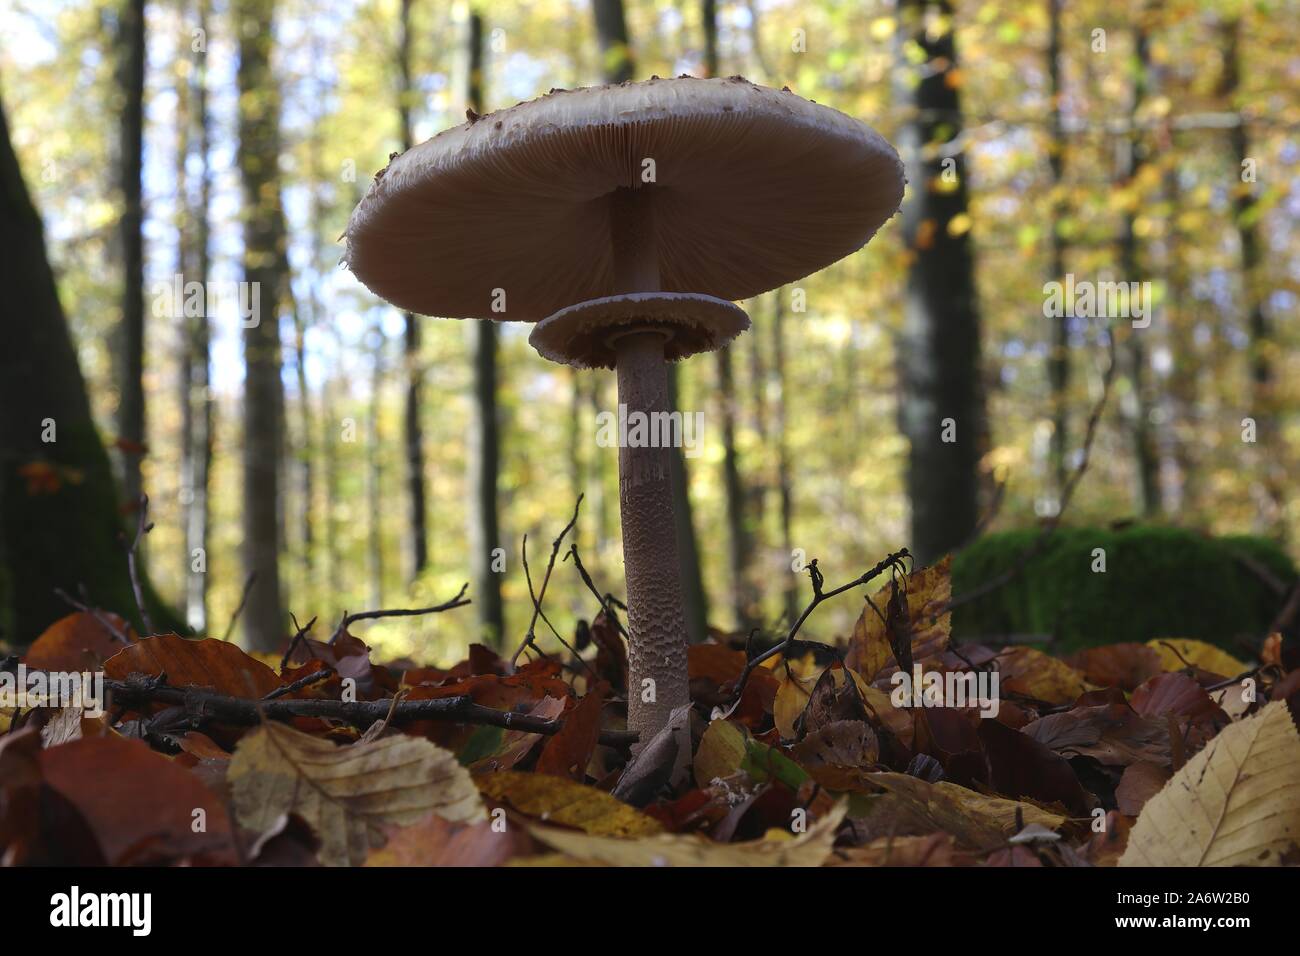 Mushrooms in the autumn forest Stock Photo